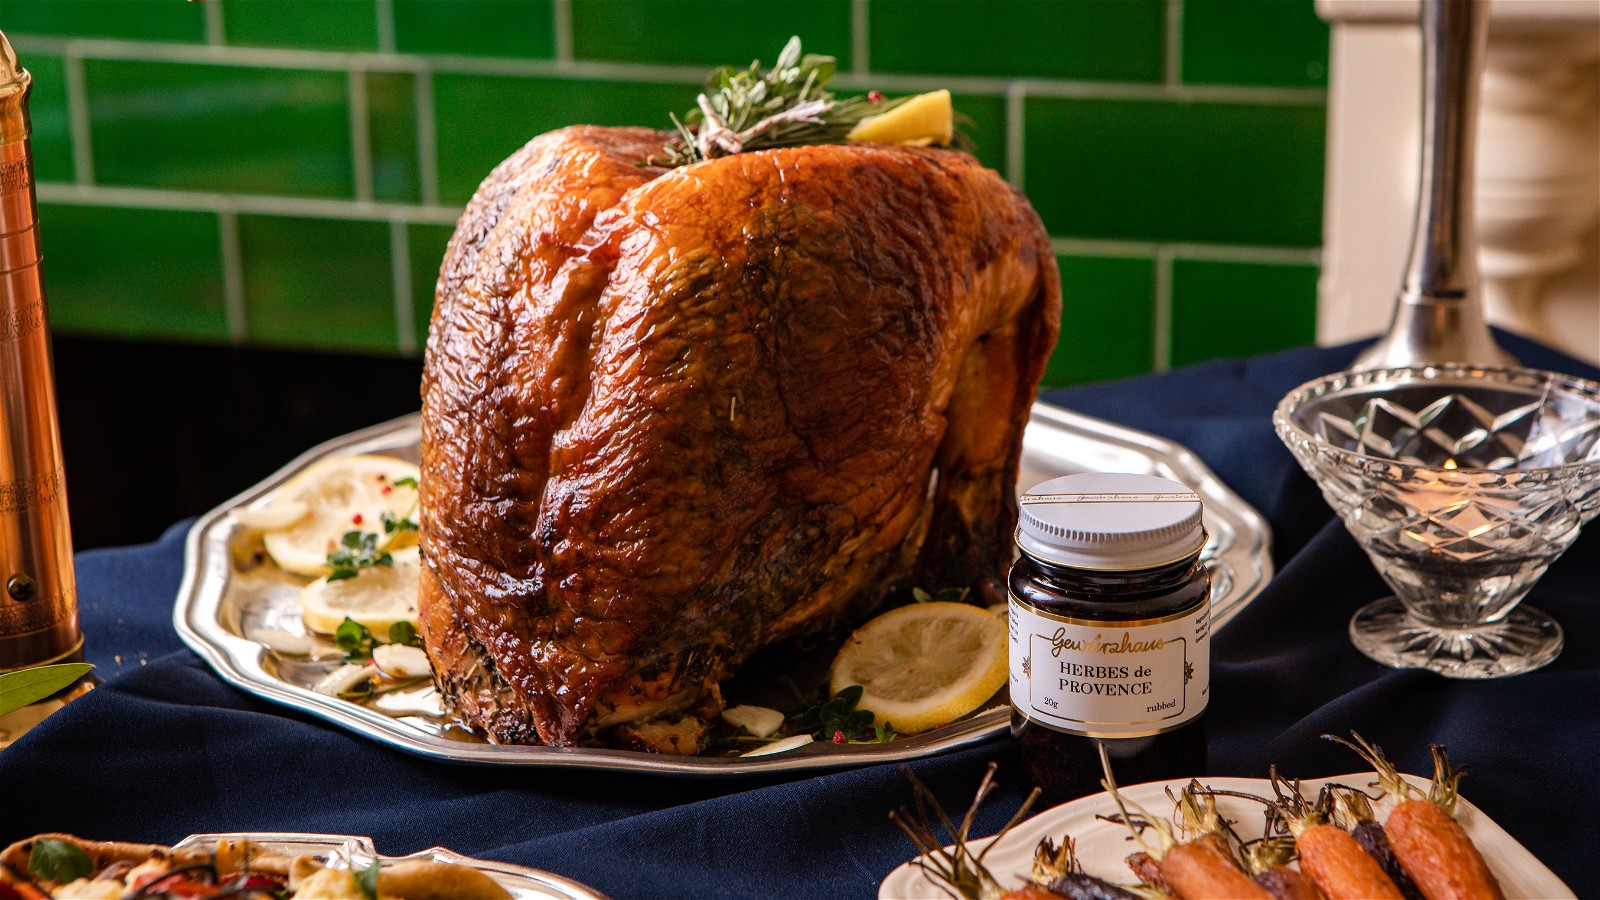 Image of Roasted Turkey with Herbes de Provence